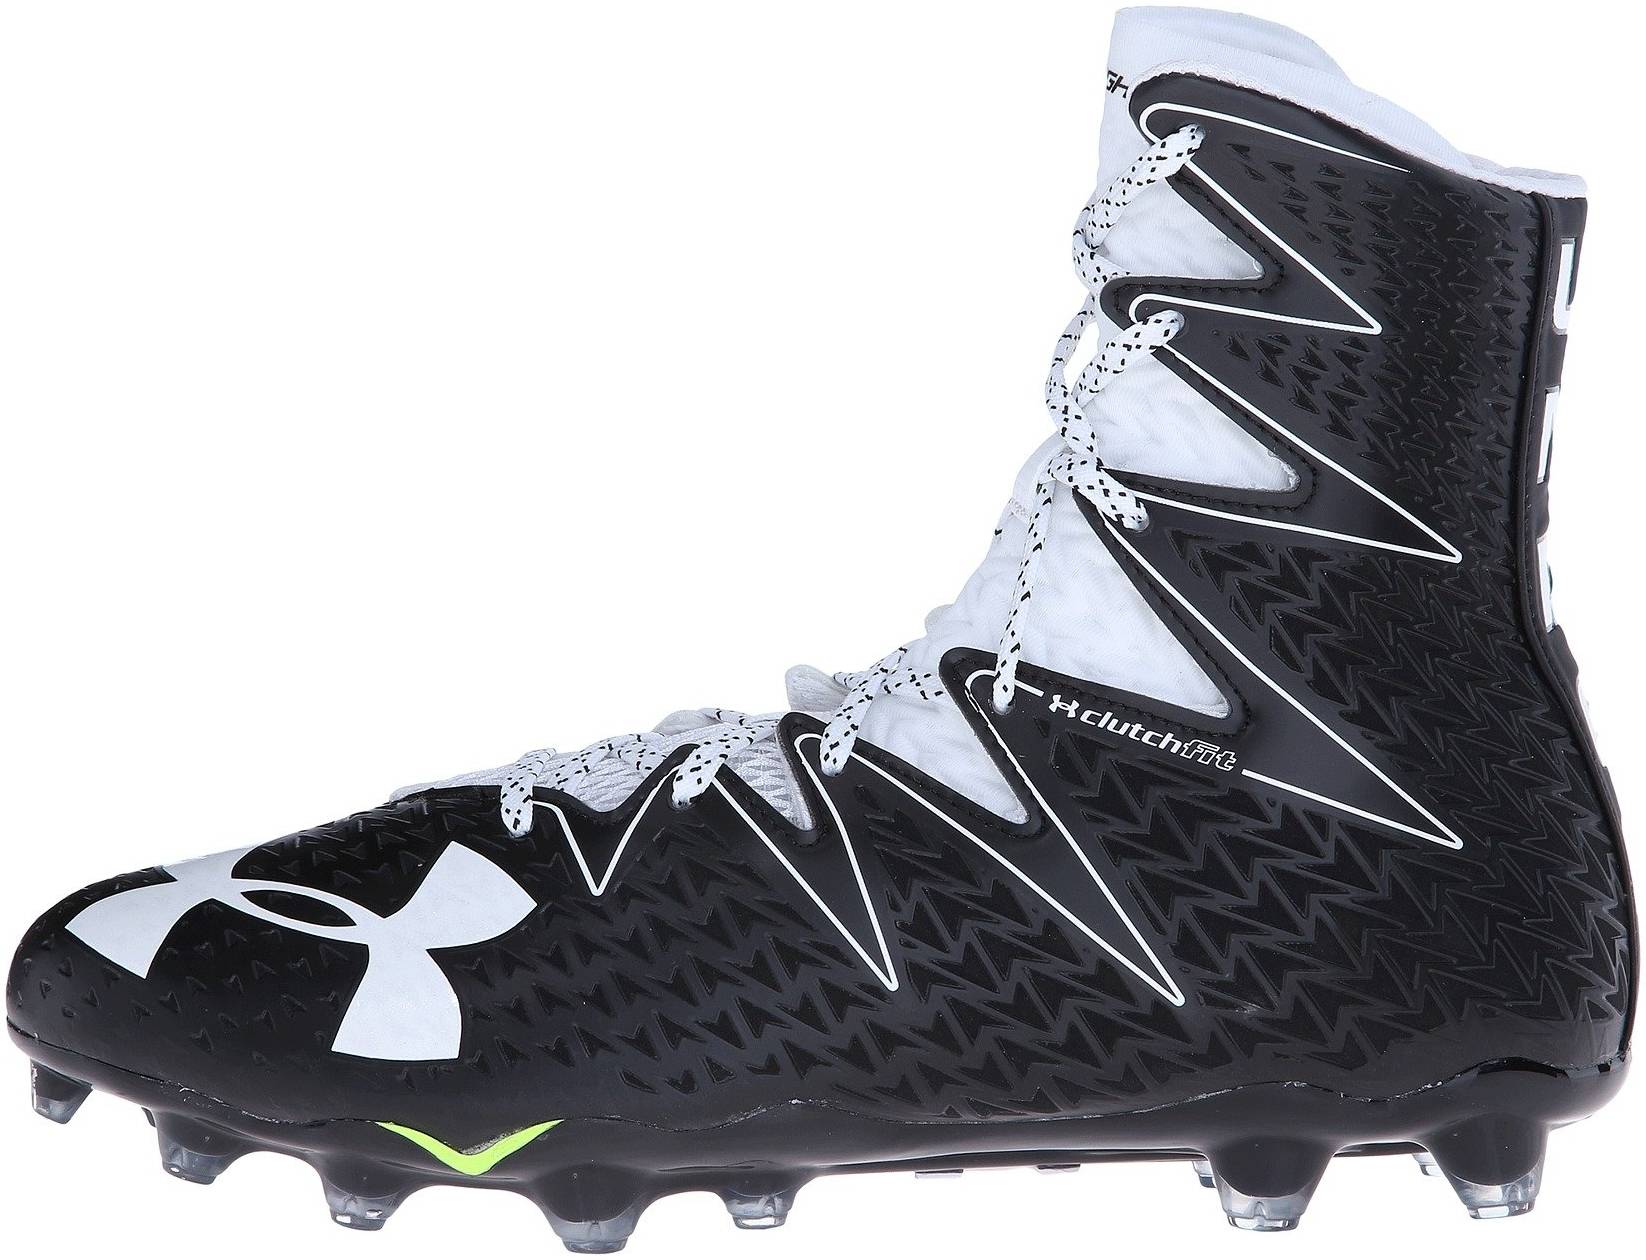 Under Armour UA Highlight Clutchfit Football Cleats NEW Colors & Sizes 